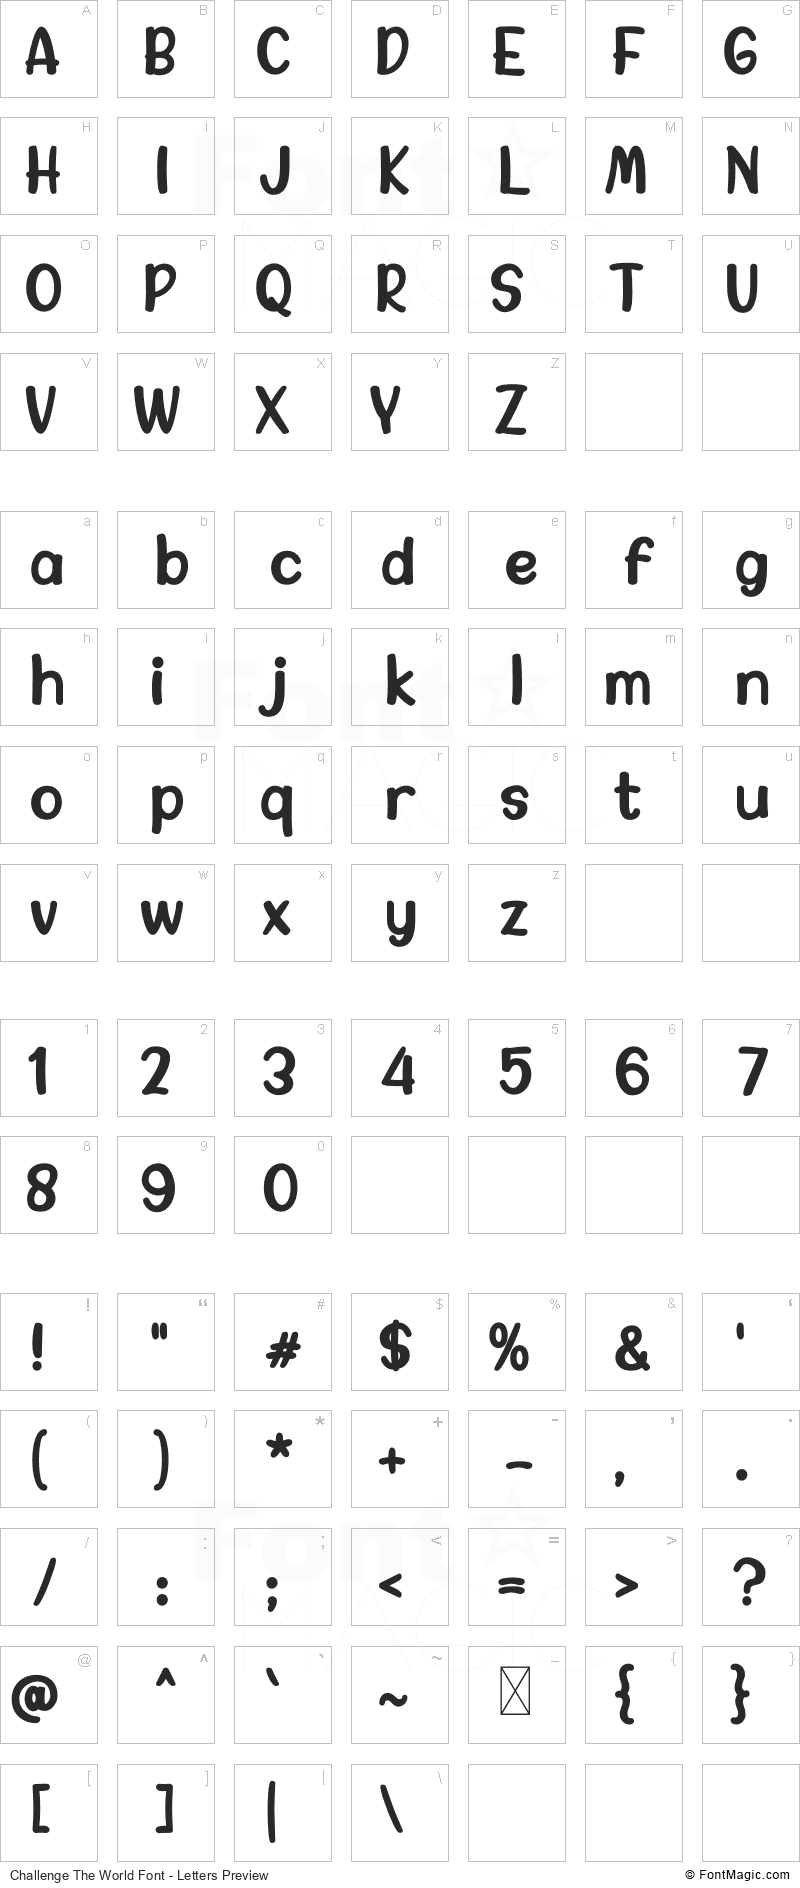 Challenge The World Font - All Latters Preview Chart